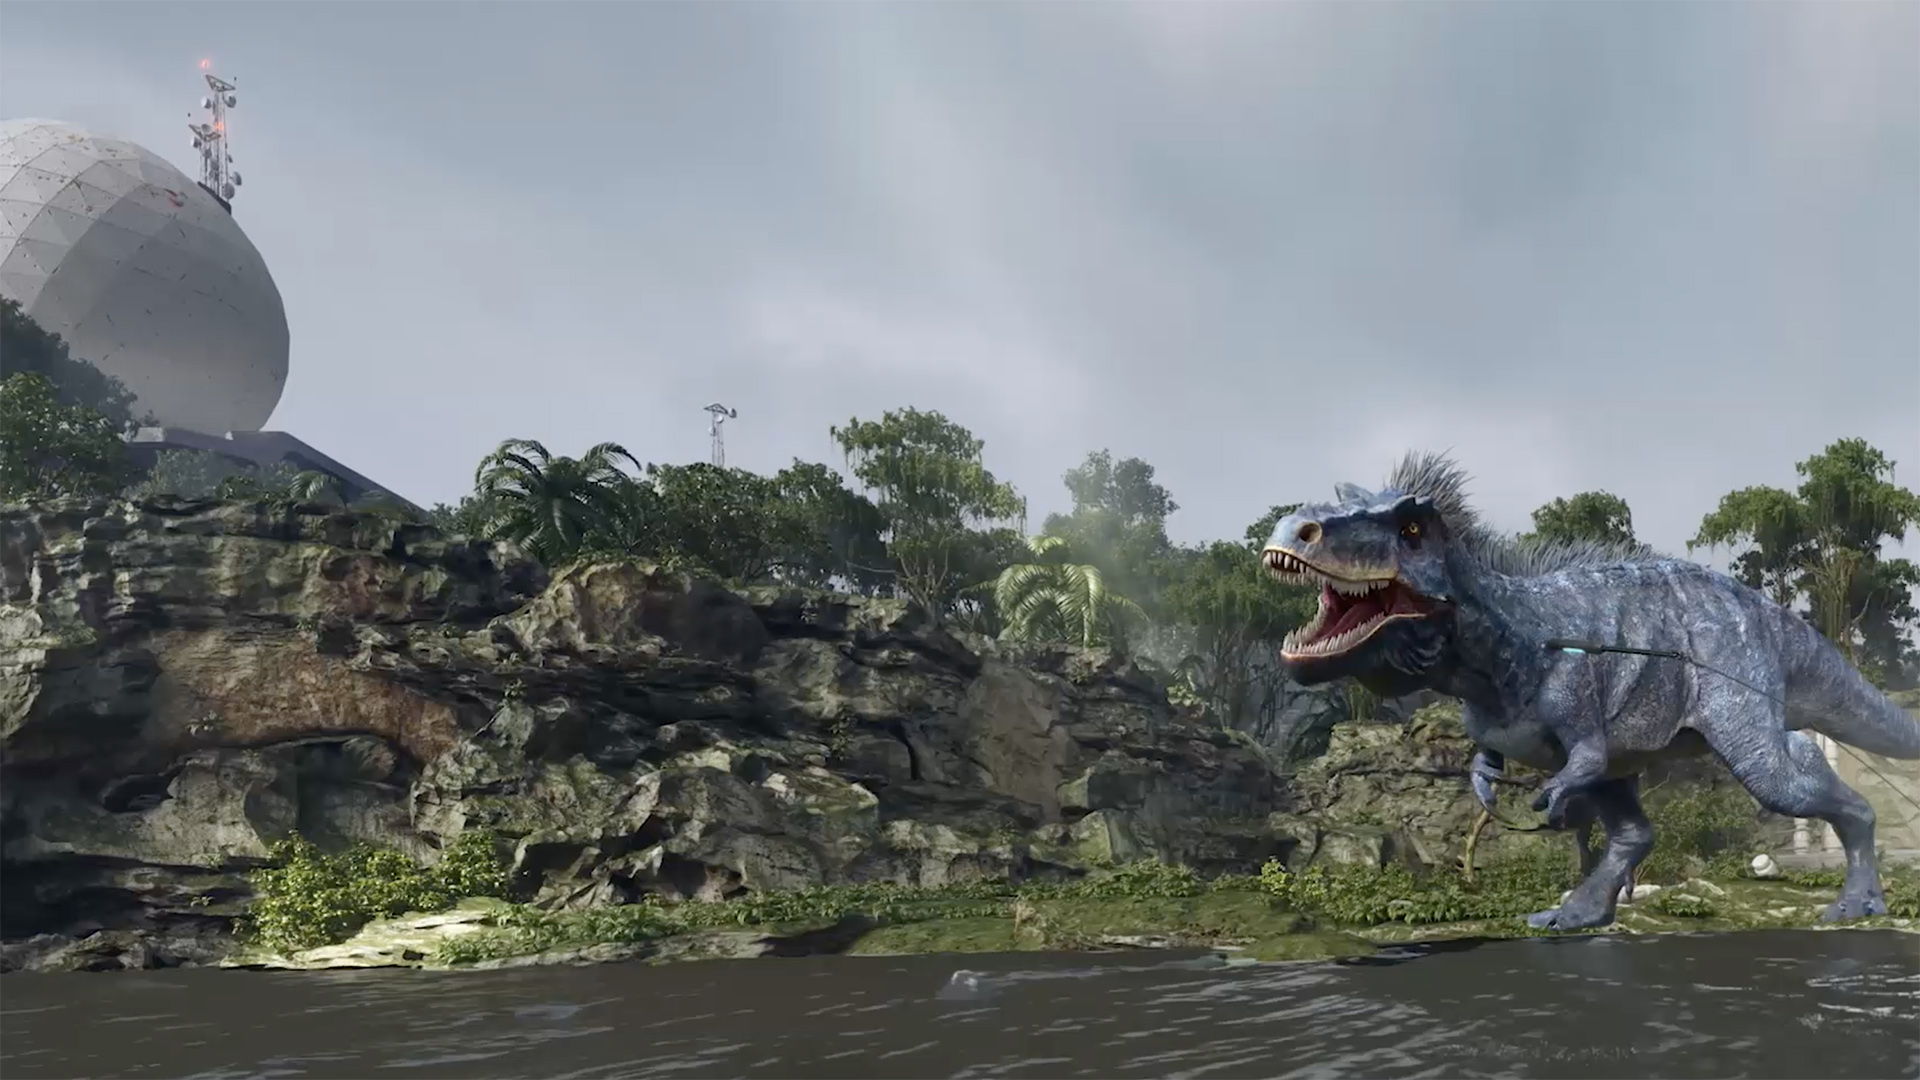 360 virtual animation showing dinosaur by river